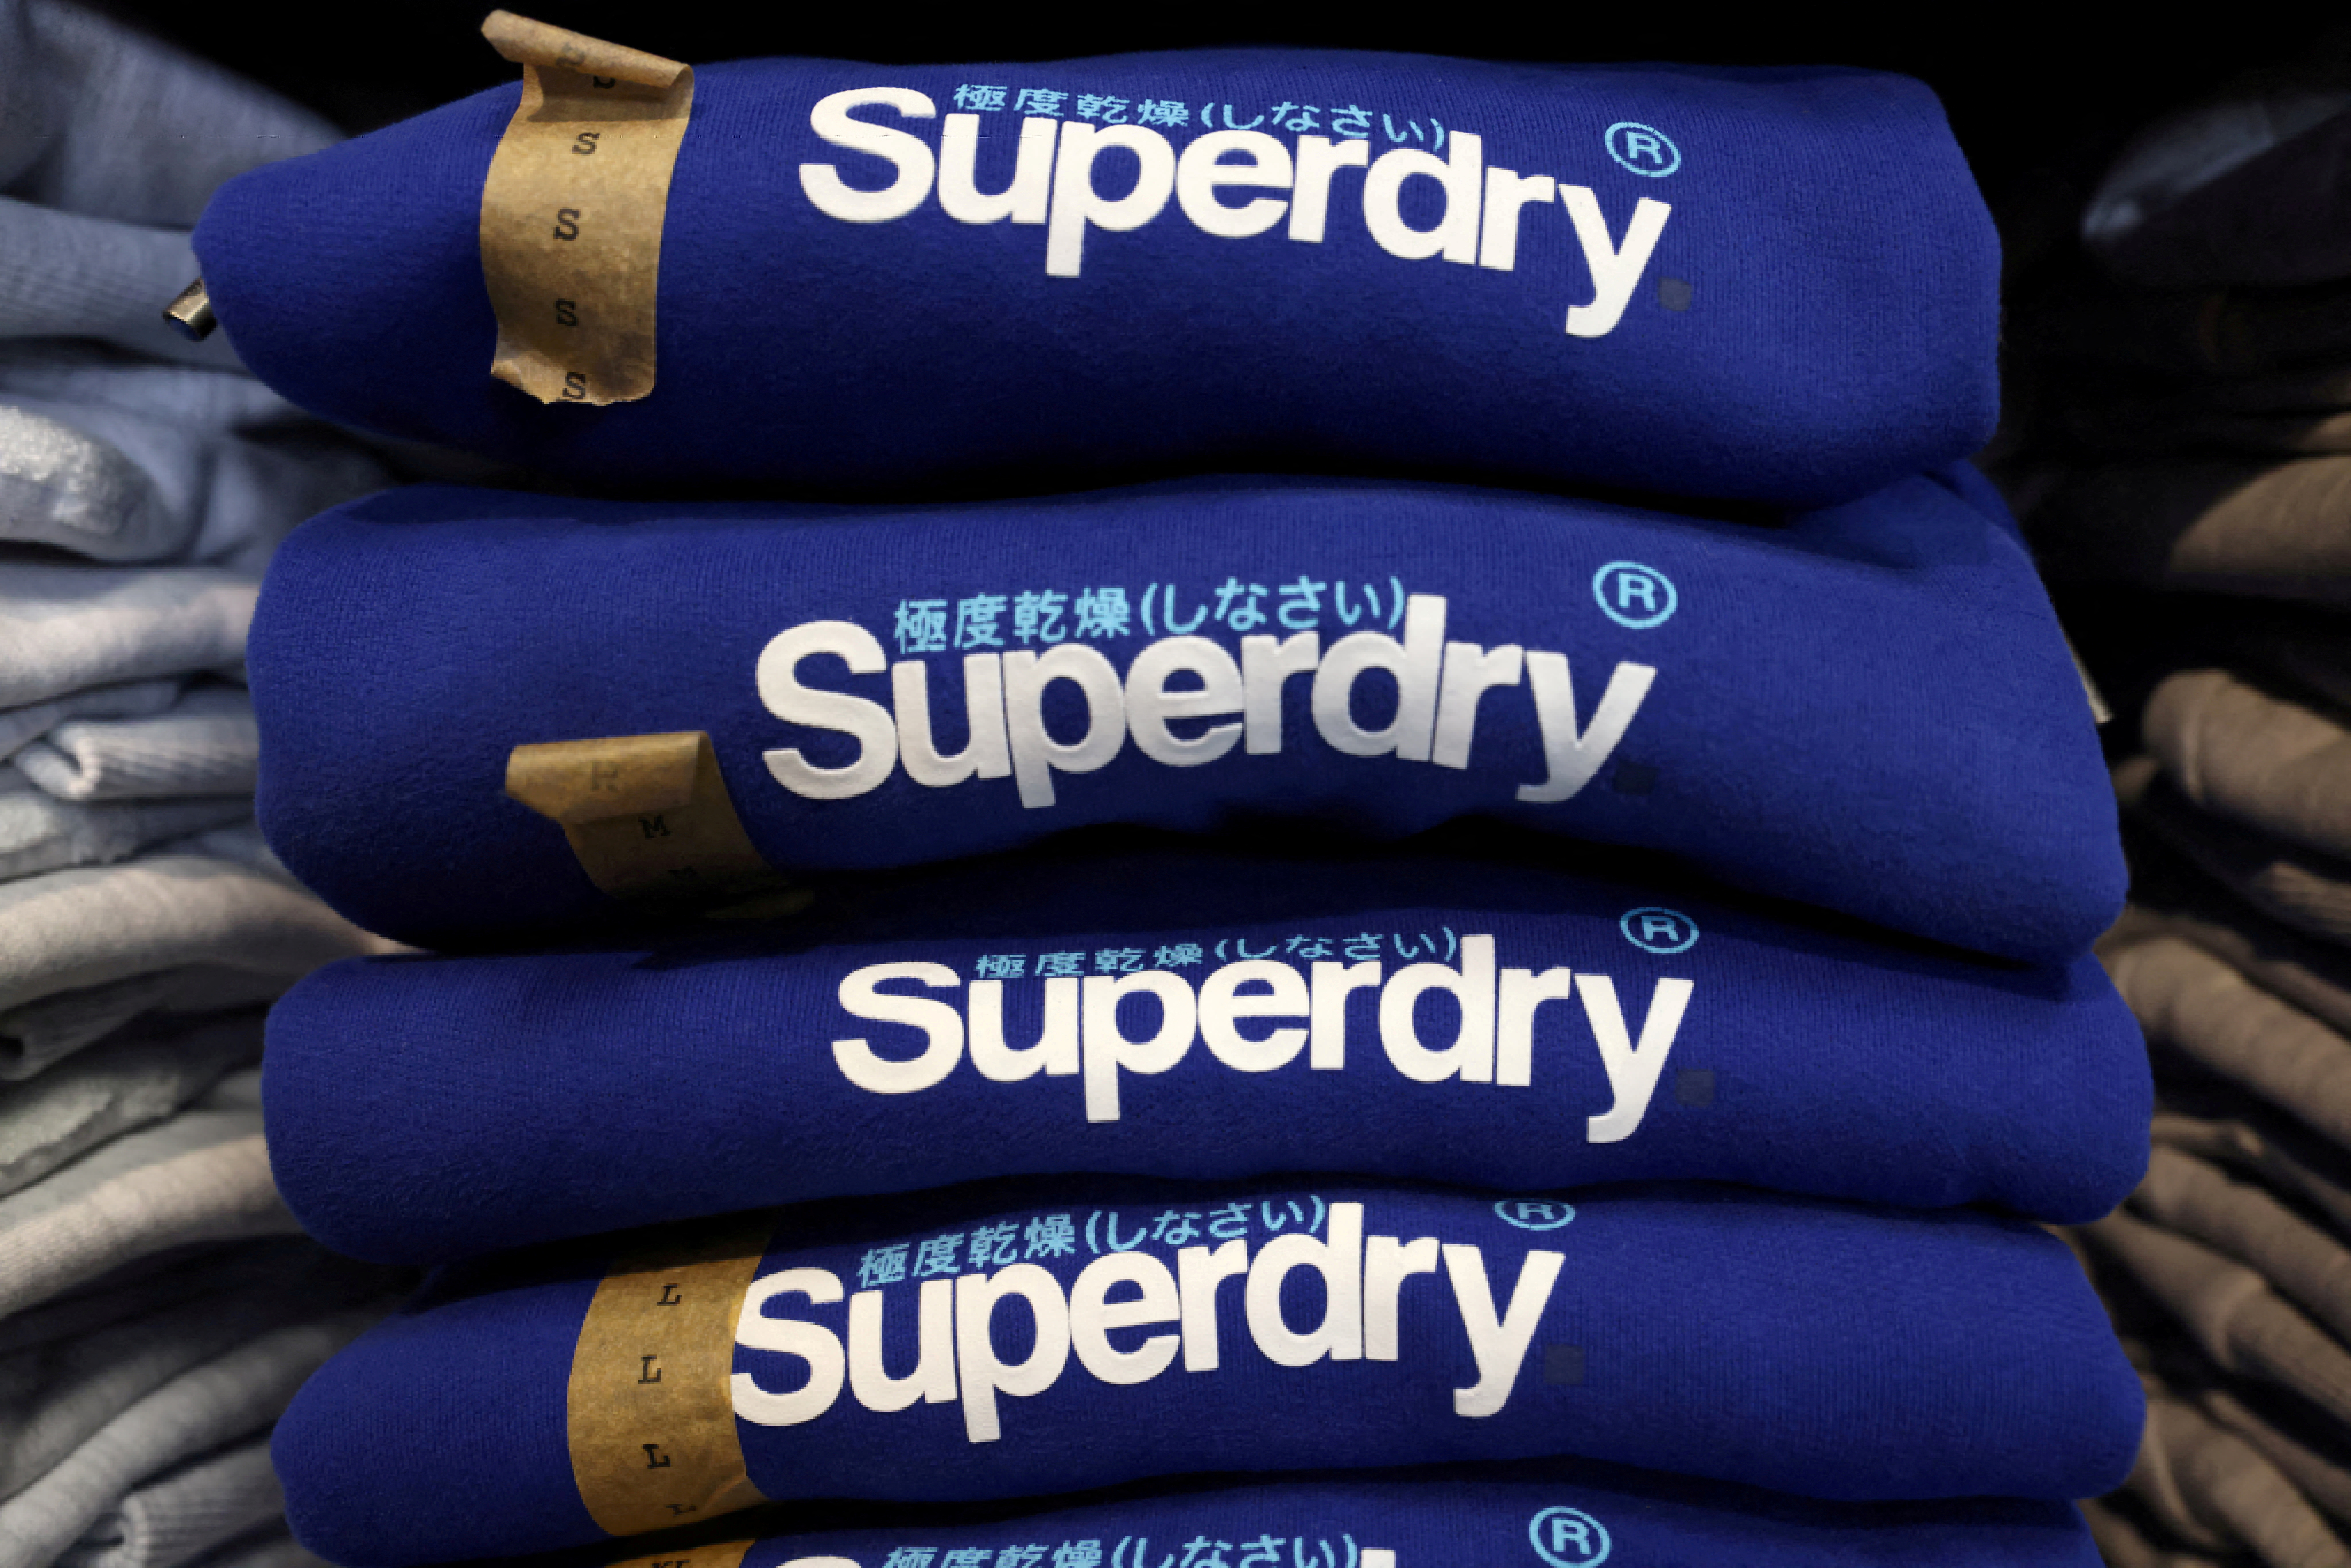 Shares of clothing retailer Superdry fell more than 80 percent in the first four months of the year. /Andrew Kelly/Reuters